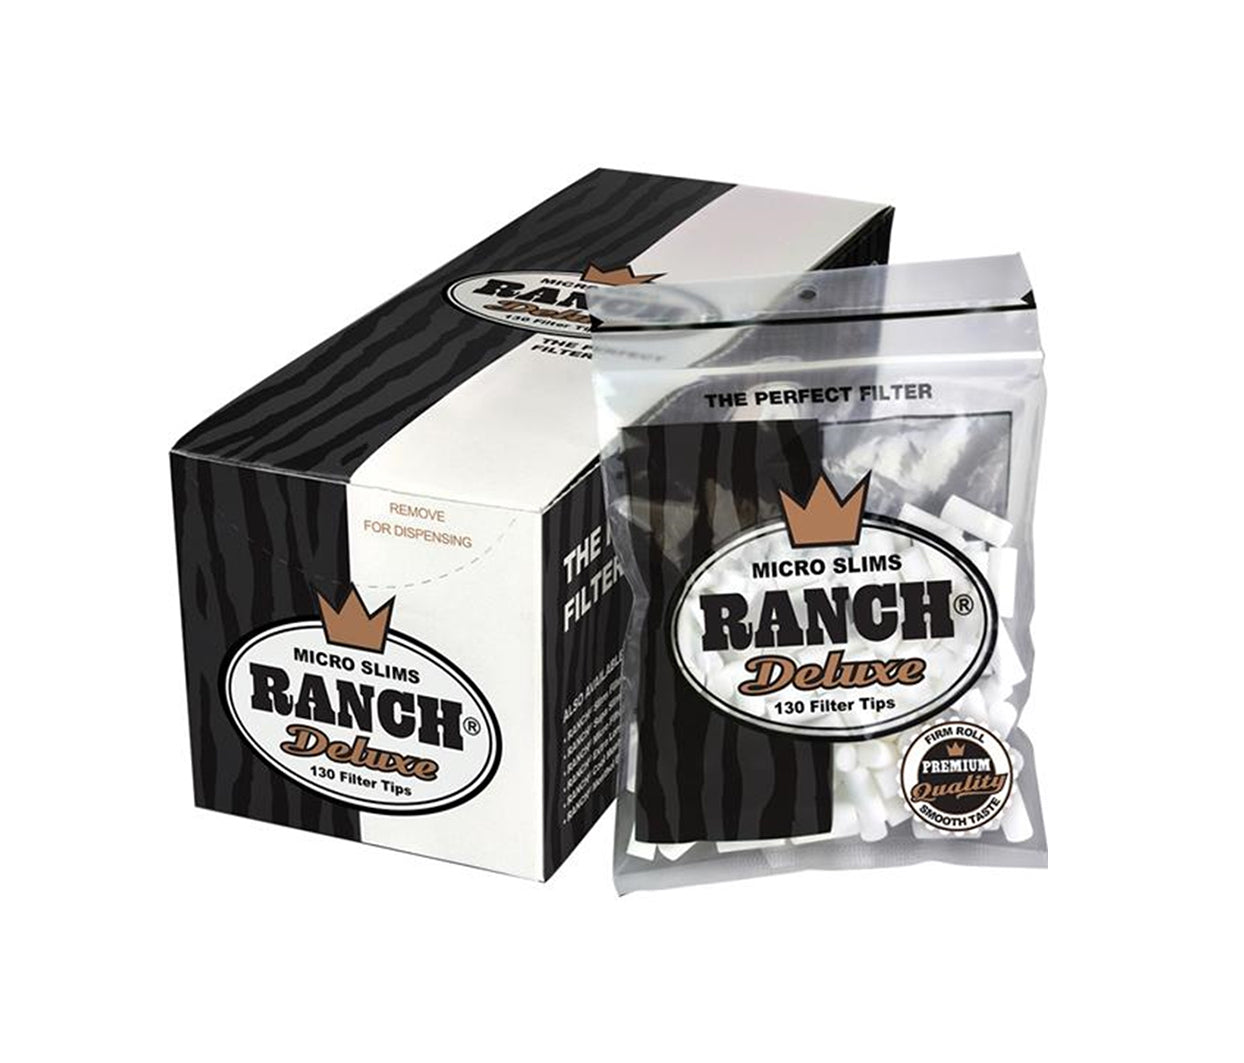 Ranch Filters Deluxe Micro Slim (Box of 12) - 20 Boxes